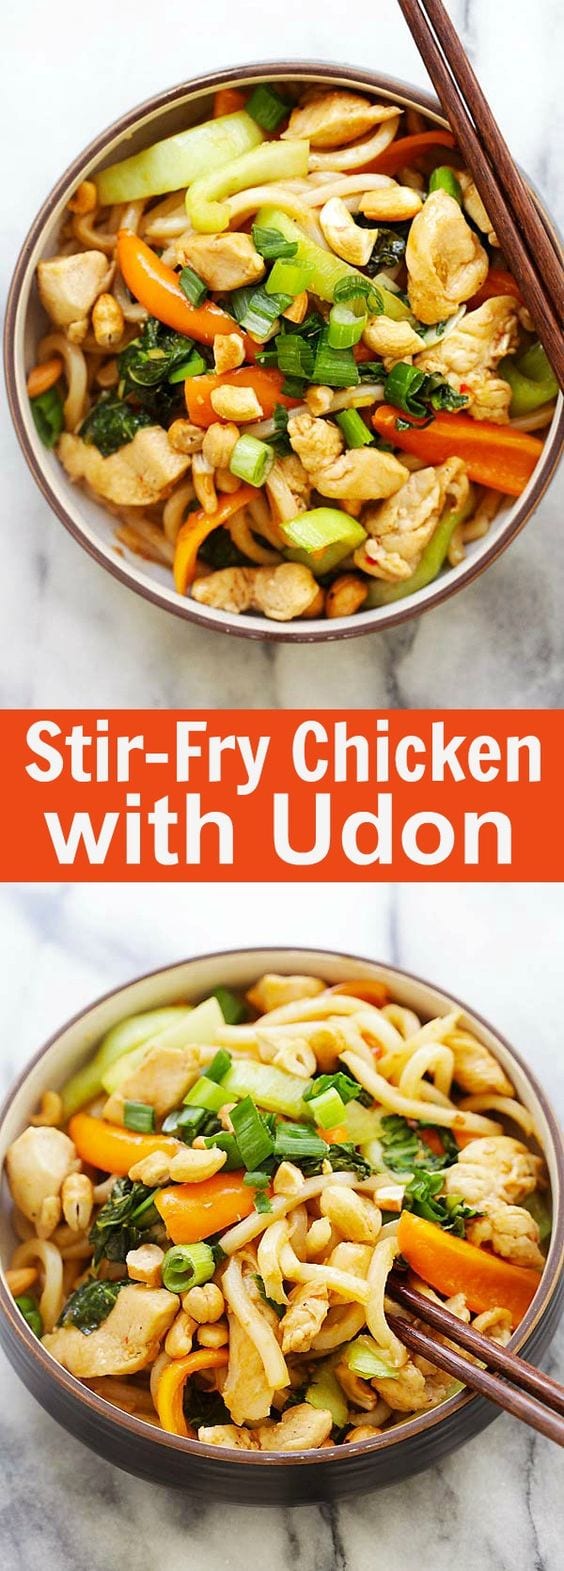 Blue Apron Stir-Fry Chicken with Udon - delightful and chewy udon noodles blend seamlessly with tender chicken and sauteed peppers and bok choy. It's all complete with garnishes of scallions and crunchy cashews | rasamalaysia.com